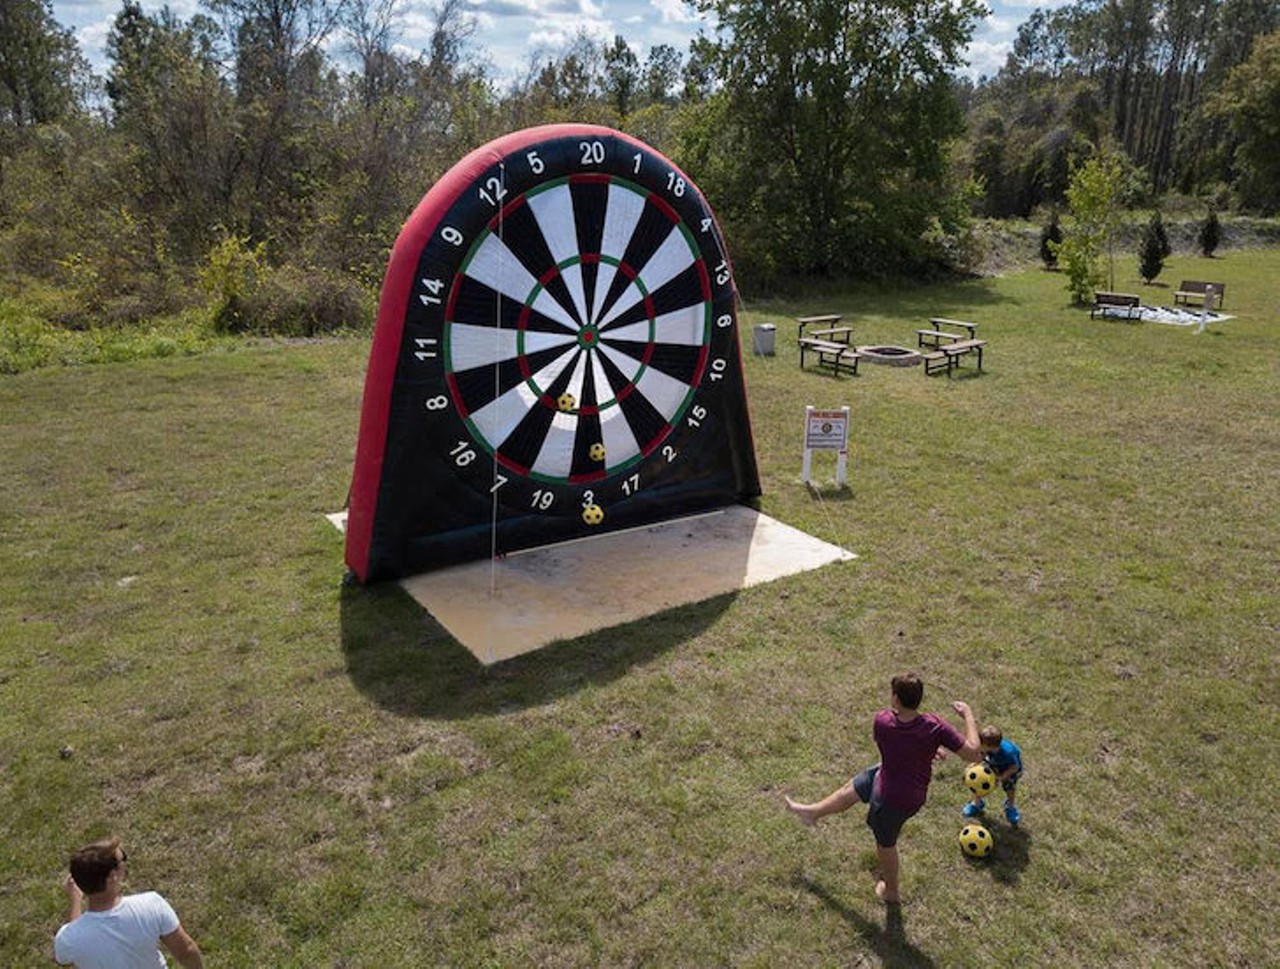 You can now rent this massive game-themed Florida mansion